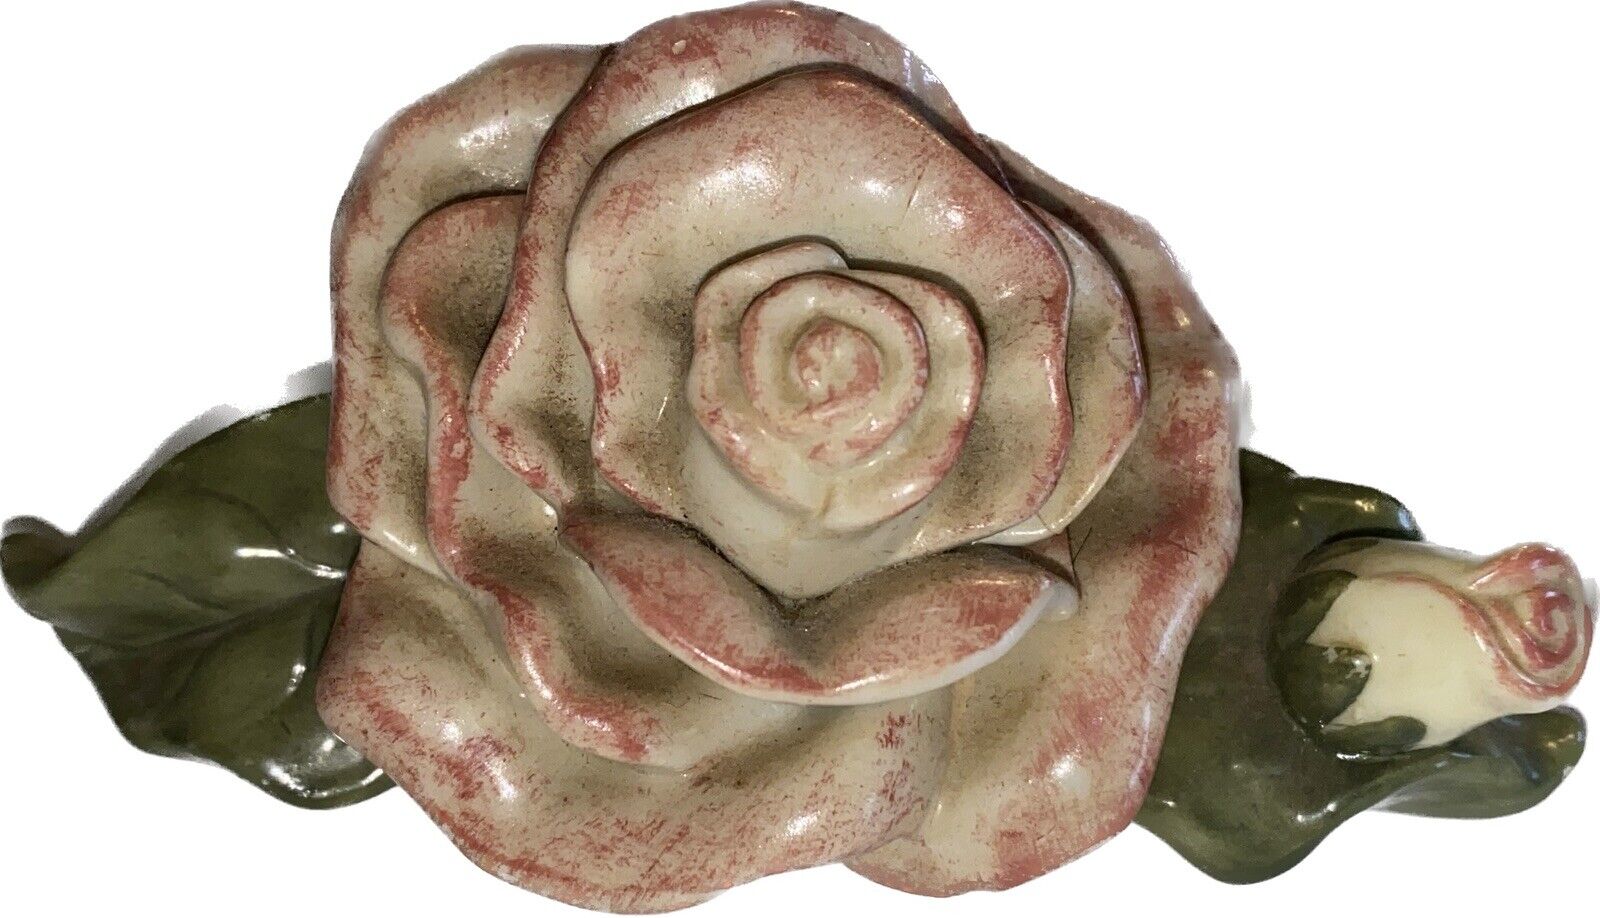 Porcelain Sculptured Rose Trinket Dish, Hinged Lid with Butterfly Clasp Vintage